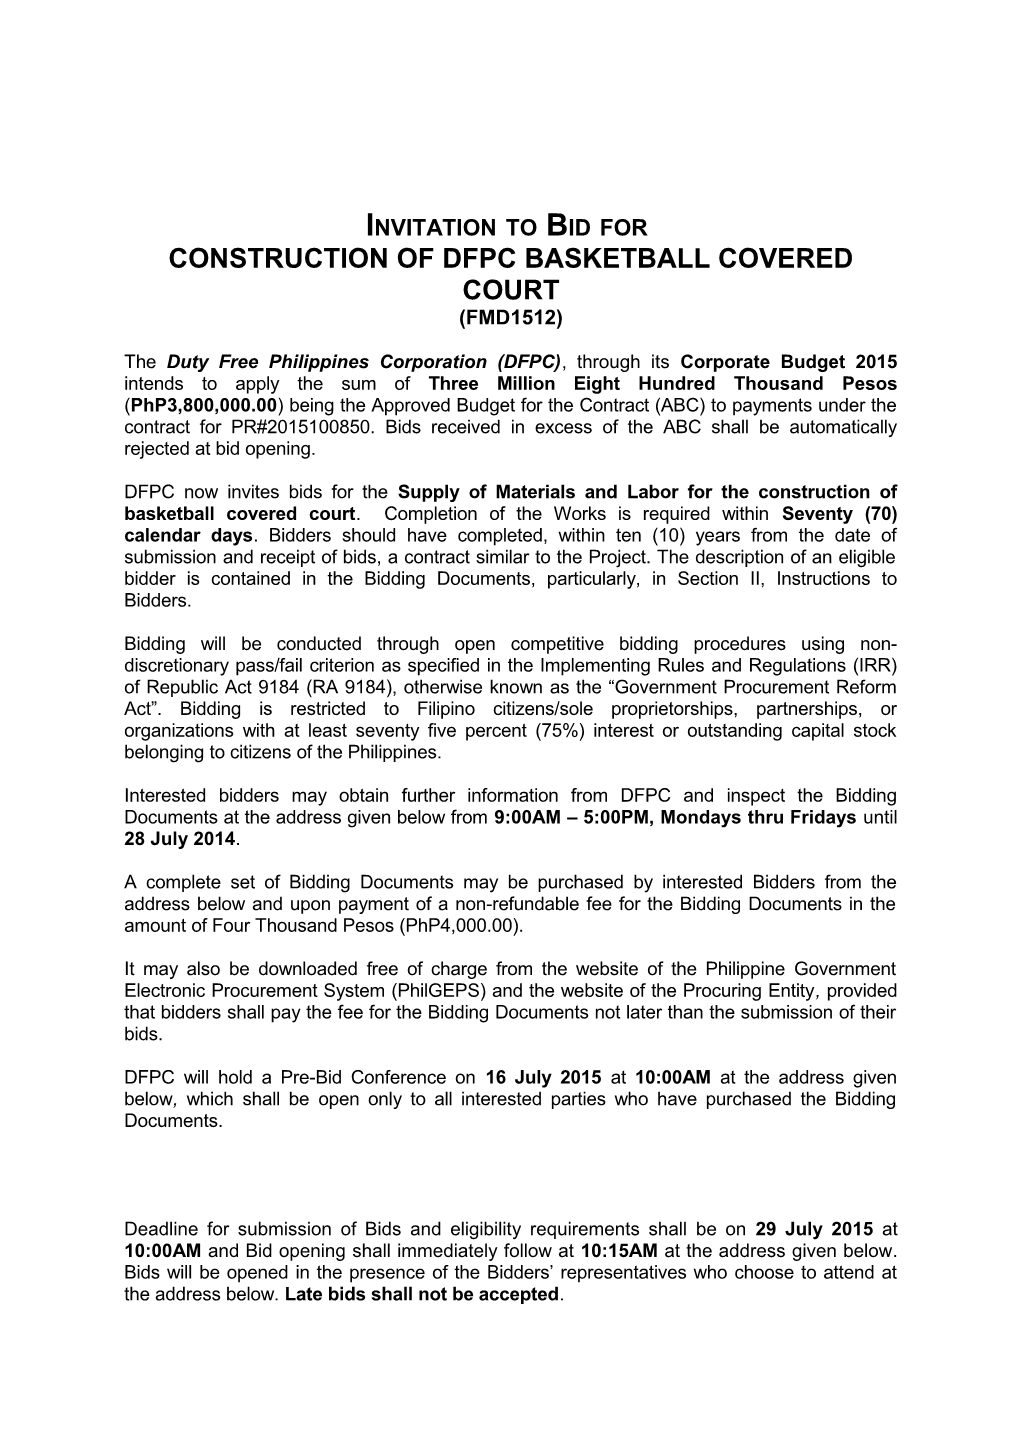 Construction of Dfpc Basketball Covered Court